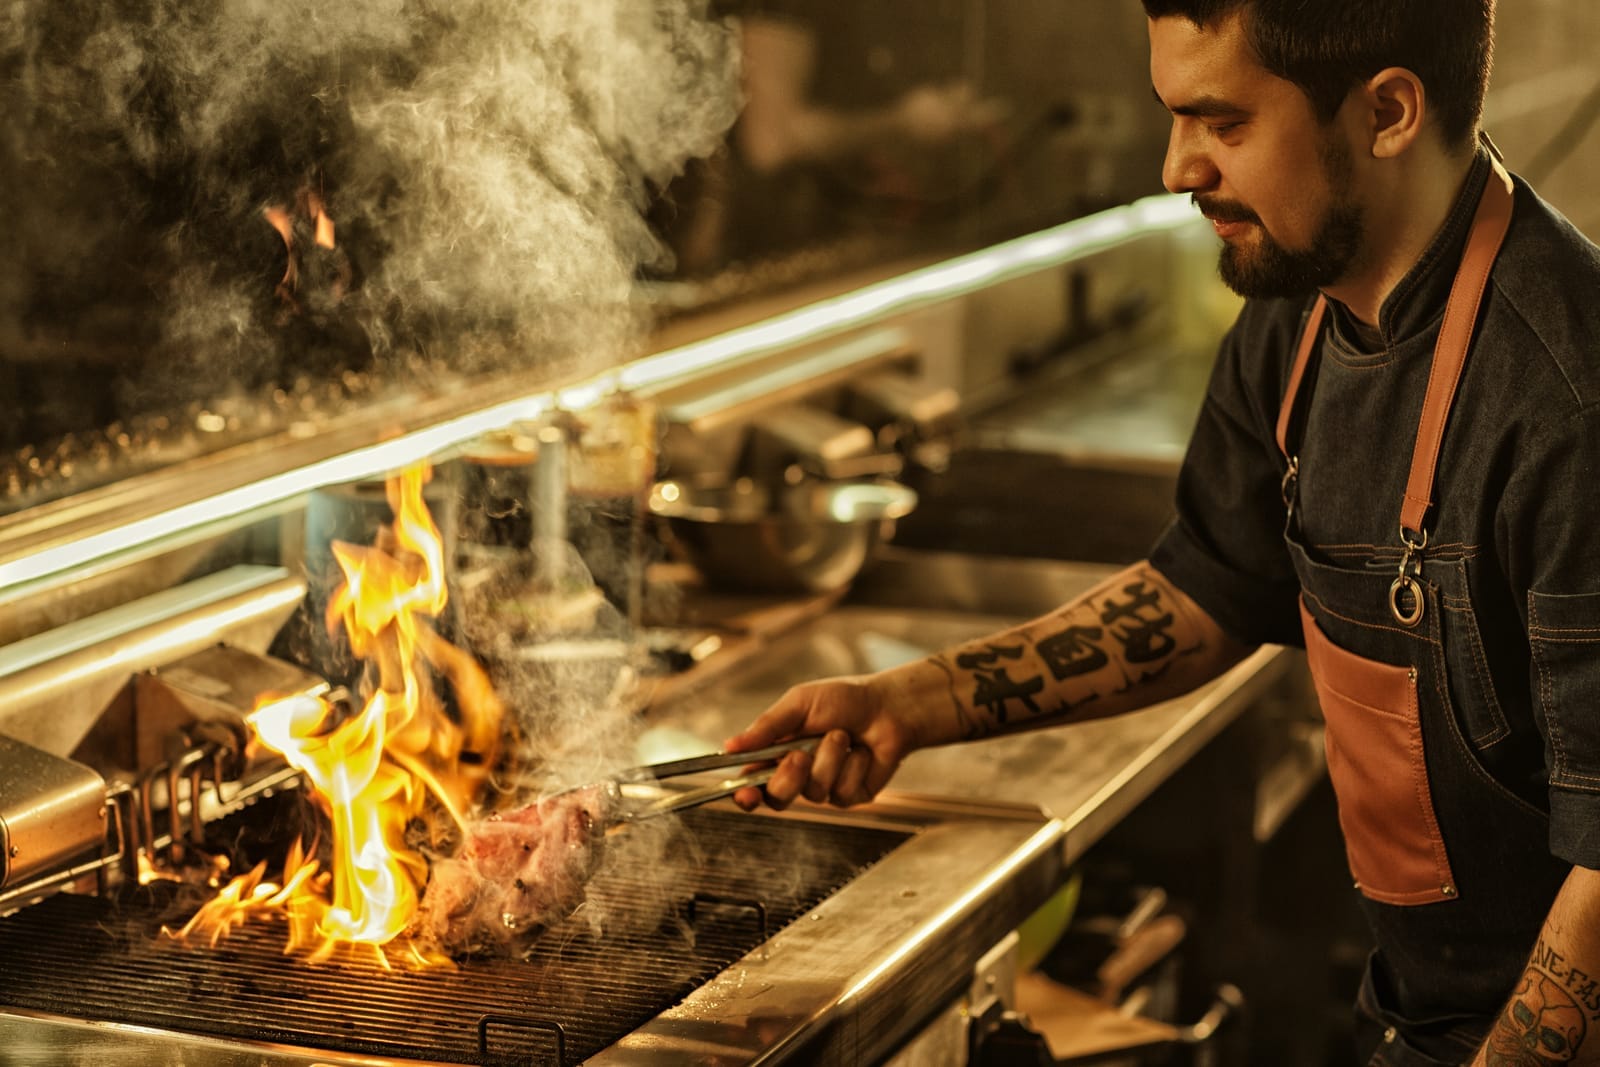 Restaurant chef grilling chicken for a prix fixe lunch menu dinner options at a restaurant